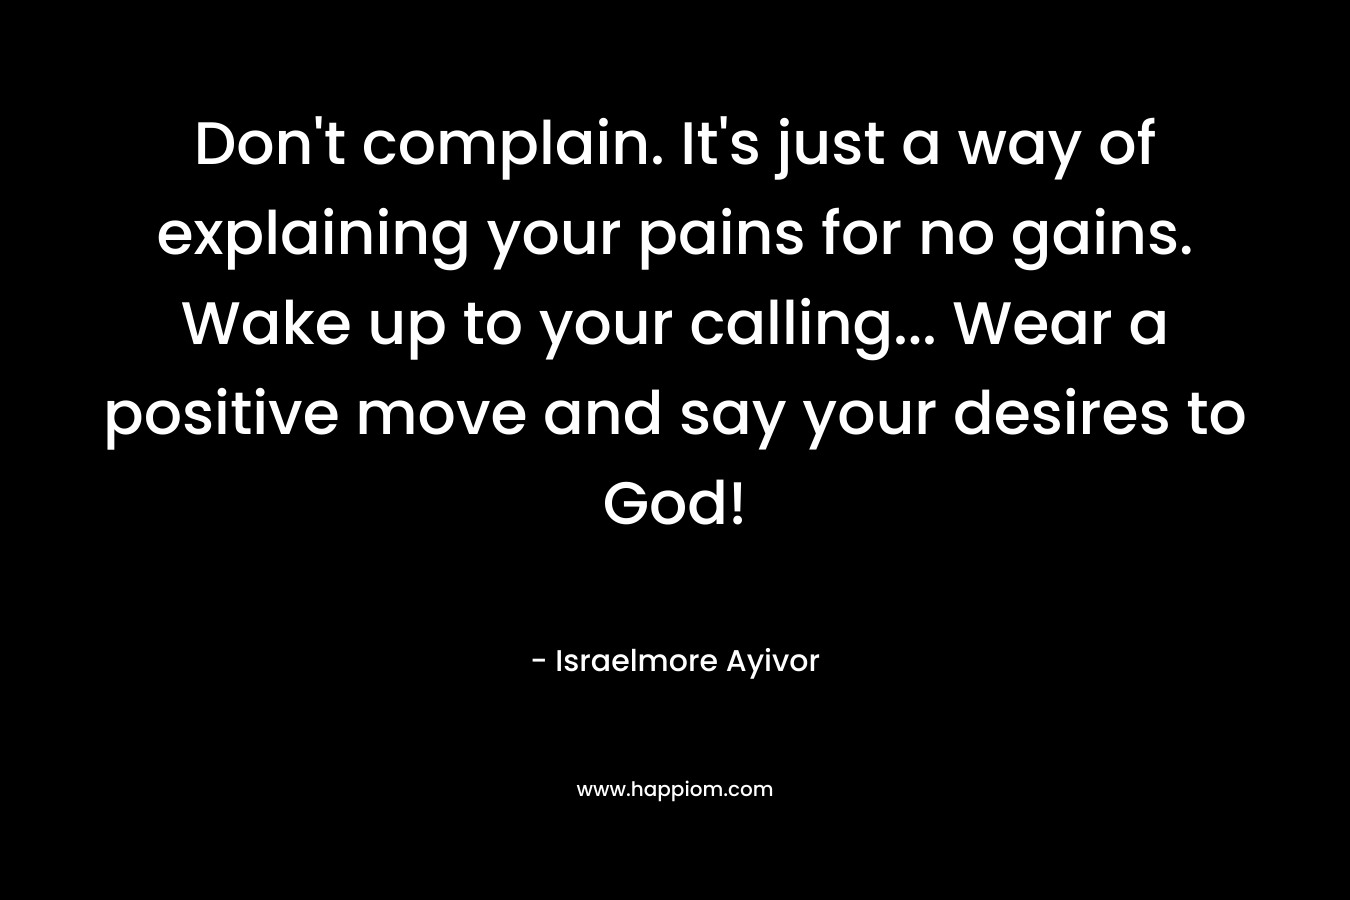 Don't complain. It's just a way of explaining your pains for no gains. Wake up to your calling... Wear a positive move and say your desires to God!